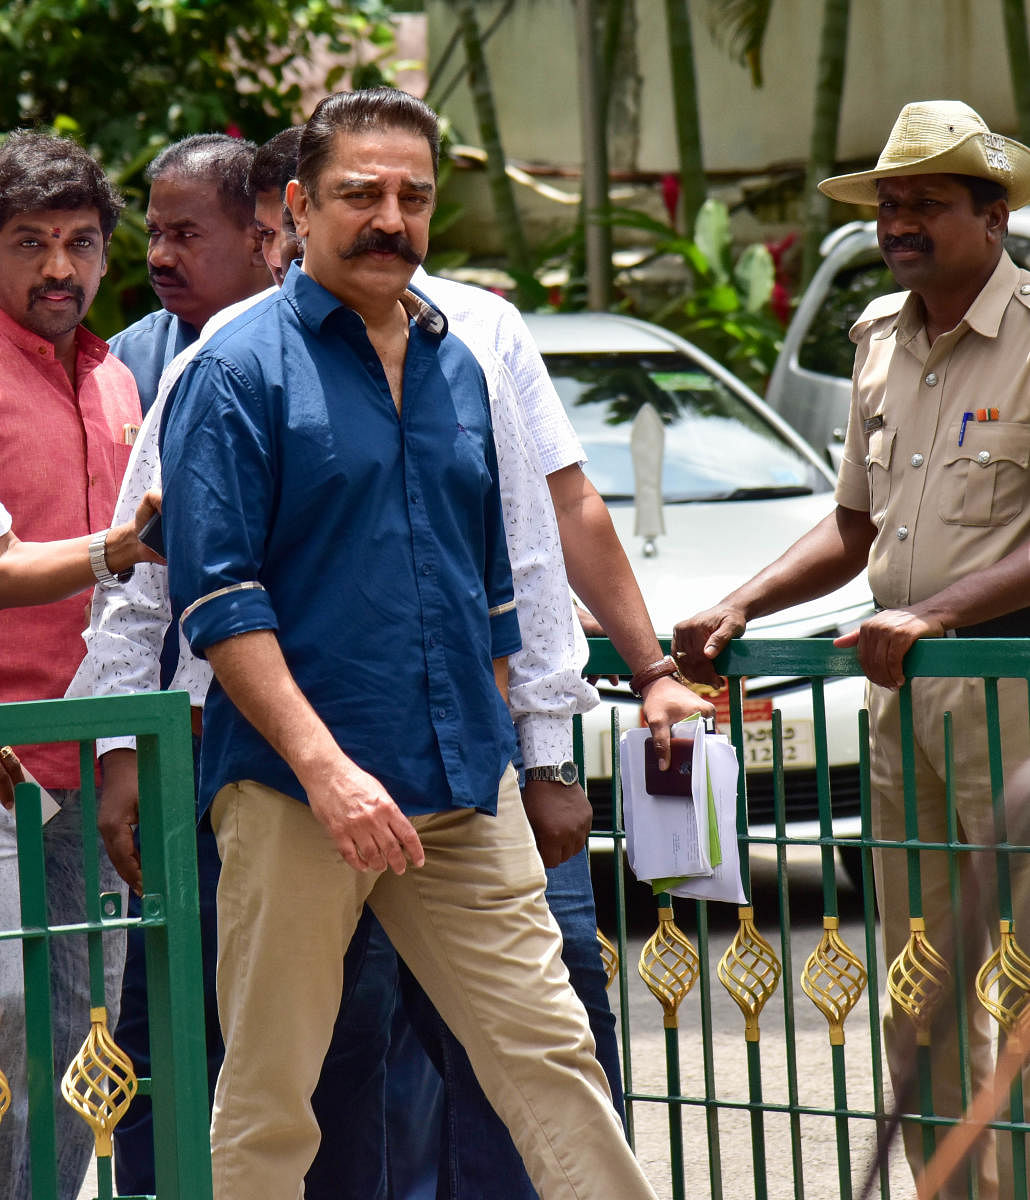 Actor Kamal Hassan comes out of Chief Minister H D Kumaraswamy's home office 'Krishna' in Bengaluru on Monday. DH Photo